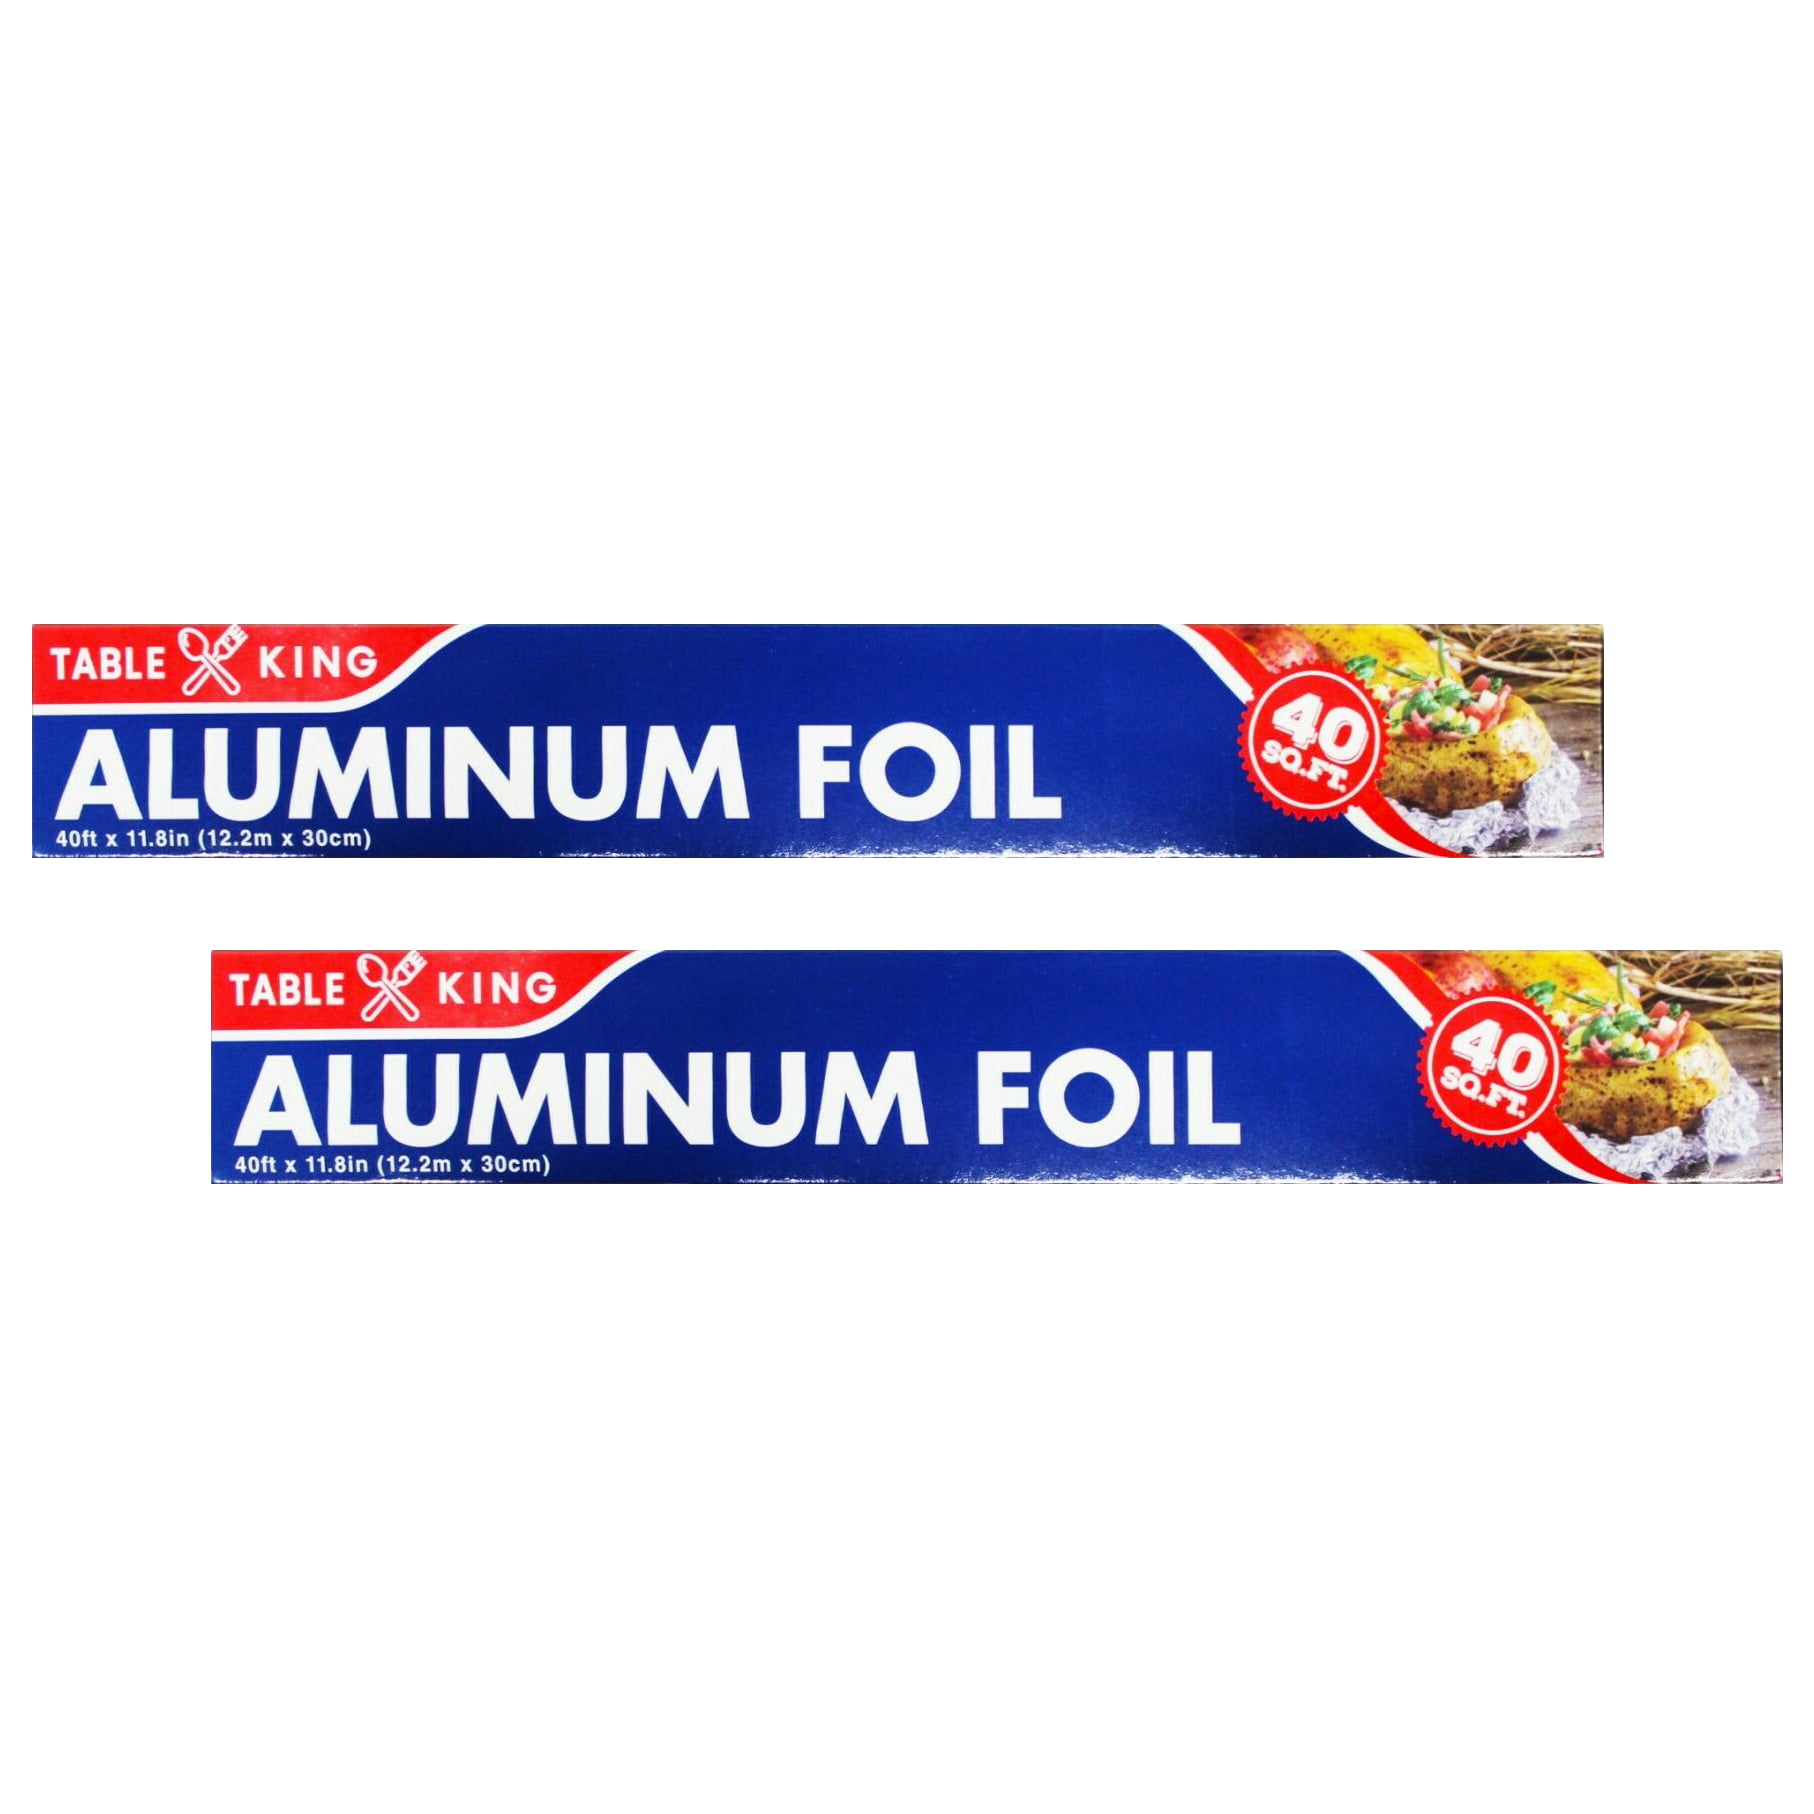 4 Table King Standard Aluminum Foil Roll Wrap 11.8 in x 40 ft pack of 2 6 